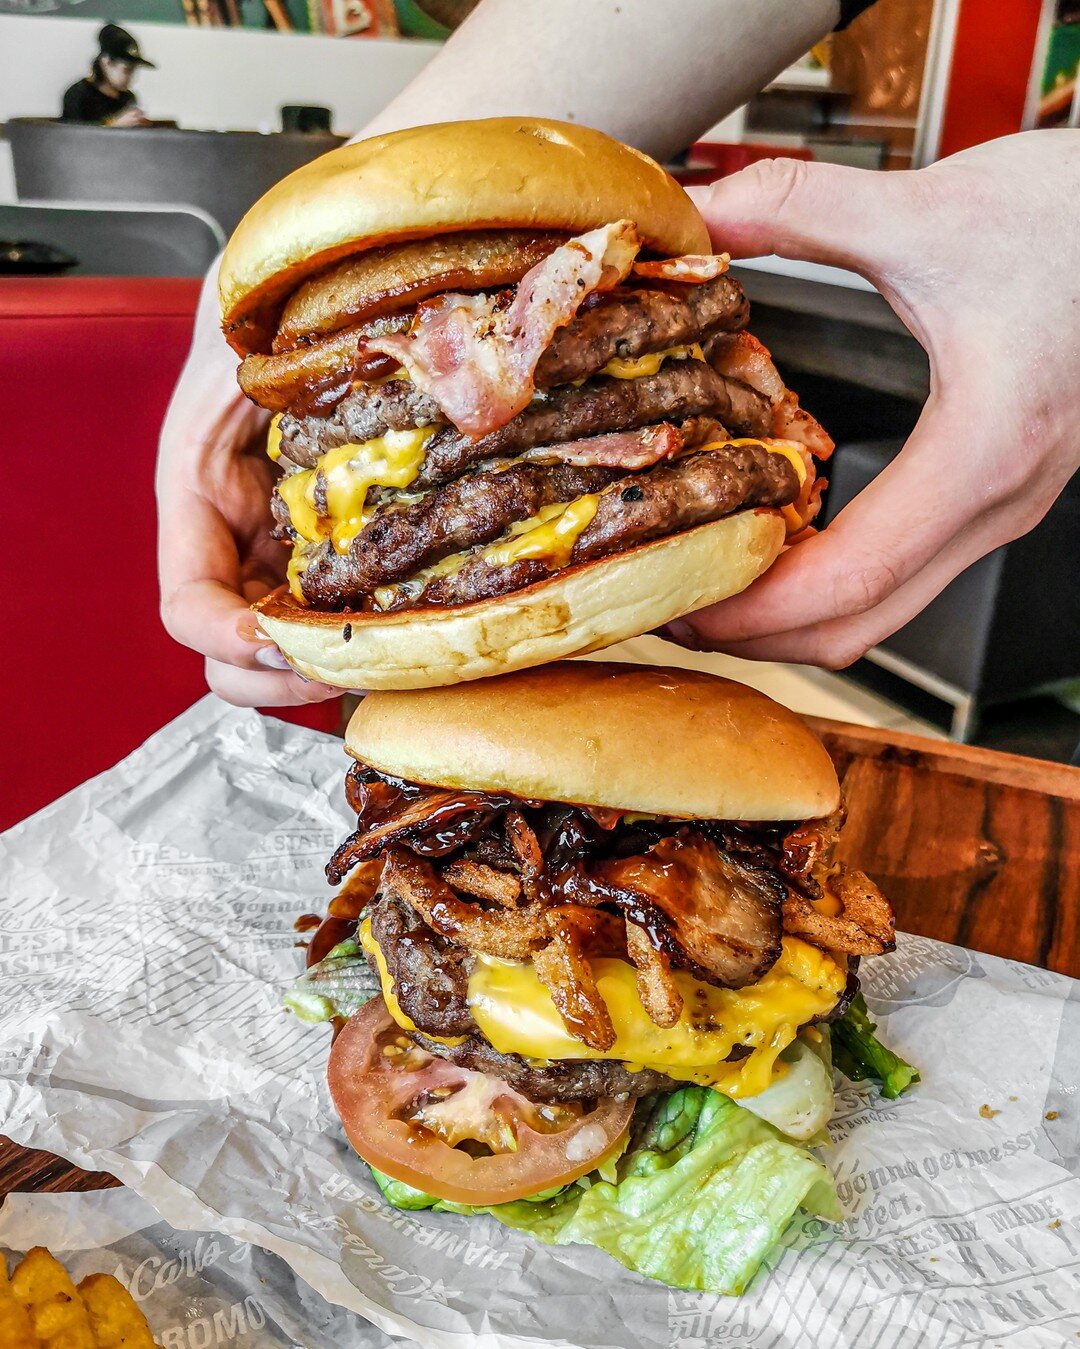 When a Double Angus burger isn&rsquo;t enough&hellip;. 
Tag a mate who&rsquo;d be keen on a Double Double Big Angus.
Ft. The Double Double Western Bacon Big Angus 
📷 @@forkandtruffle